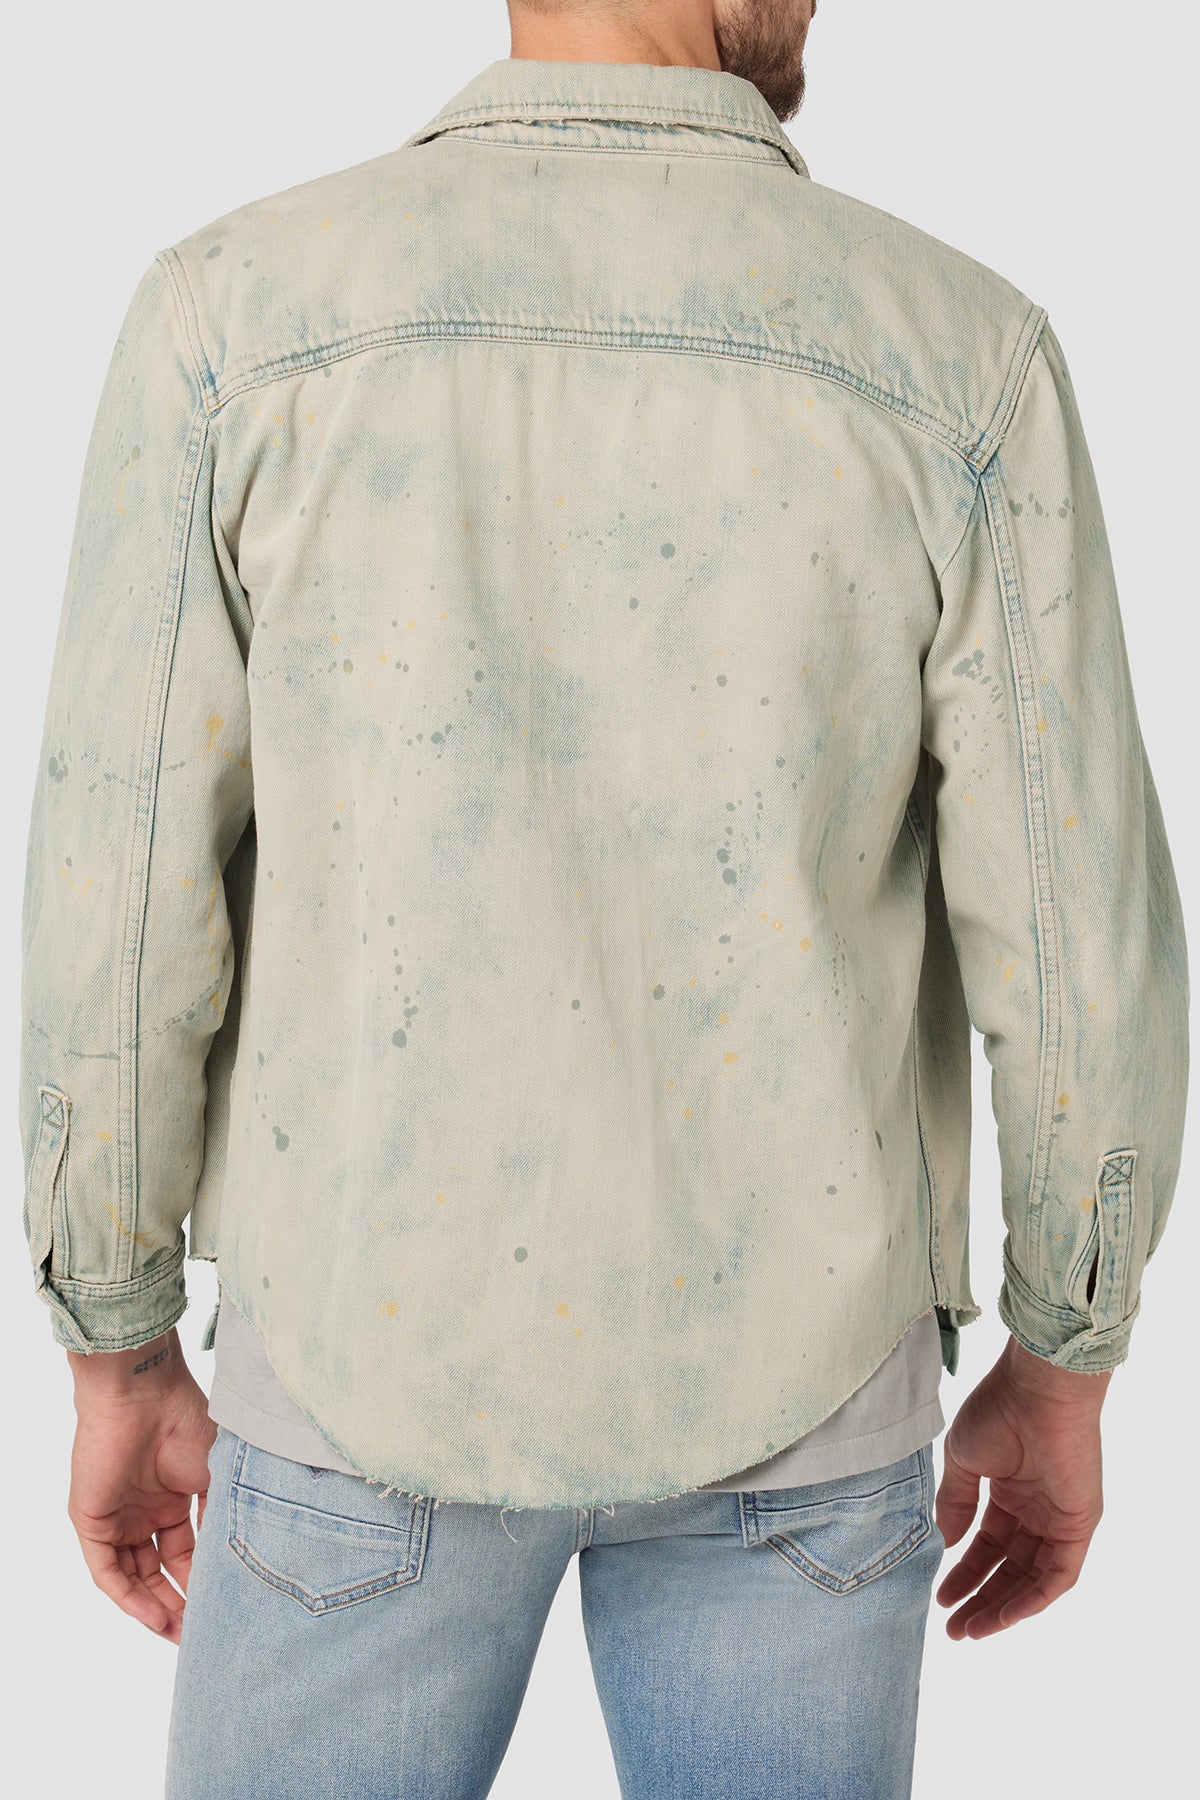 A relaxed denim shirt in the lightest, comfiest 100% cotton fabric